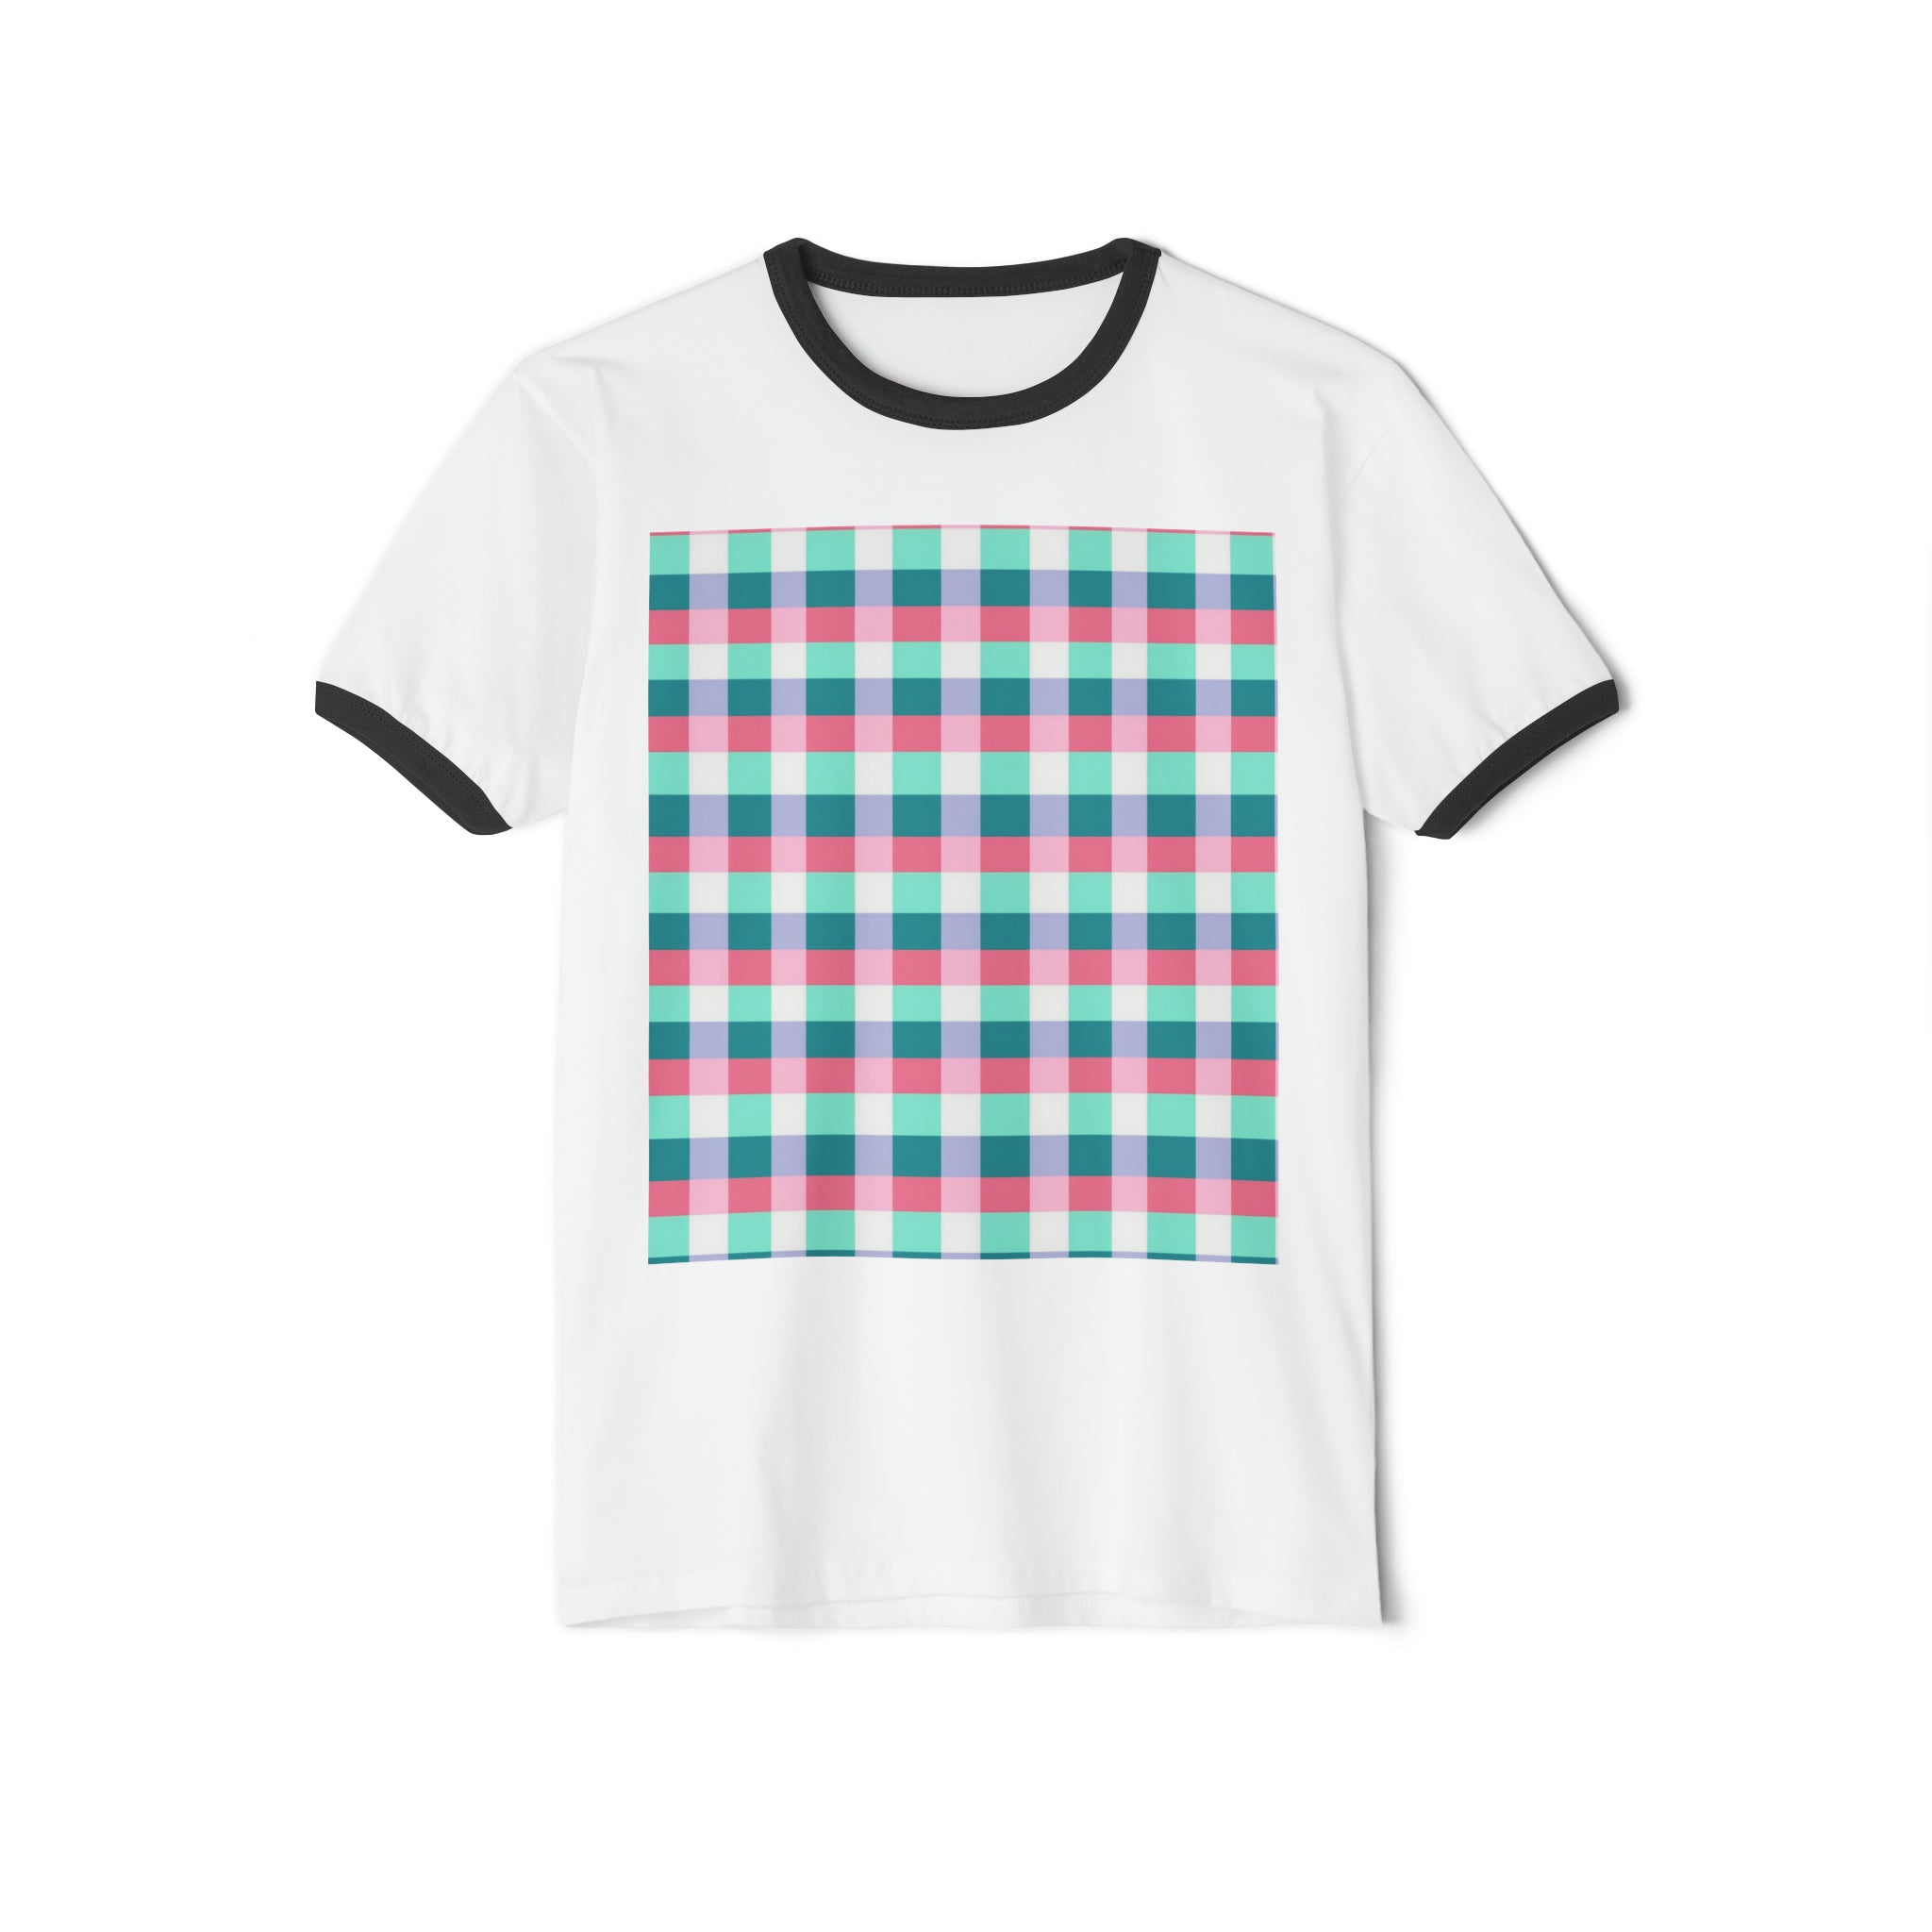 Unisex Cotton Ringer T-Shirt - Abstract Designs 03